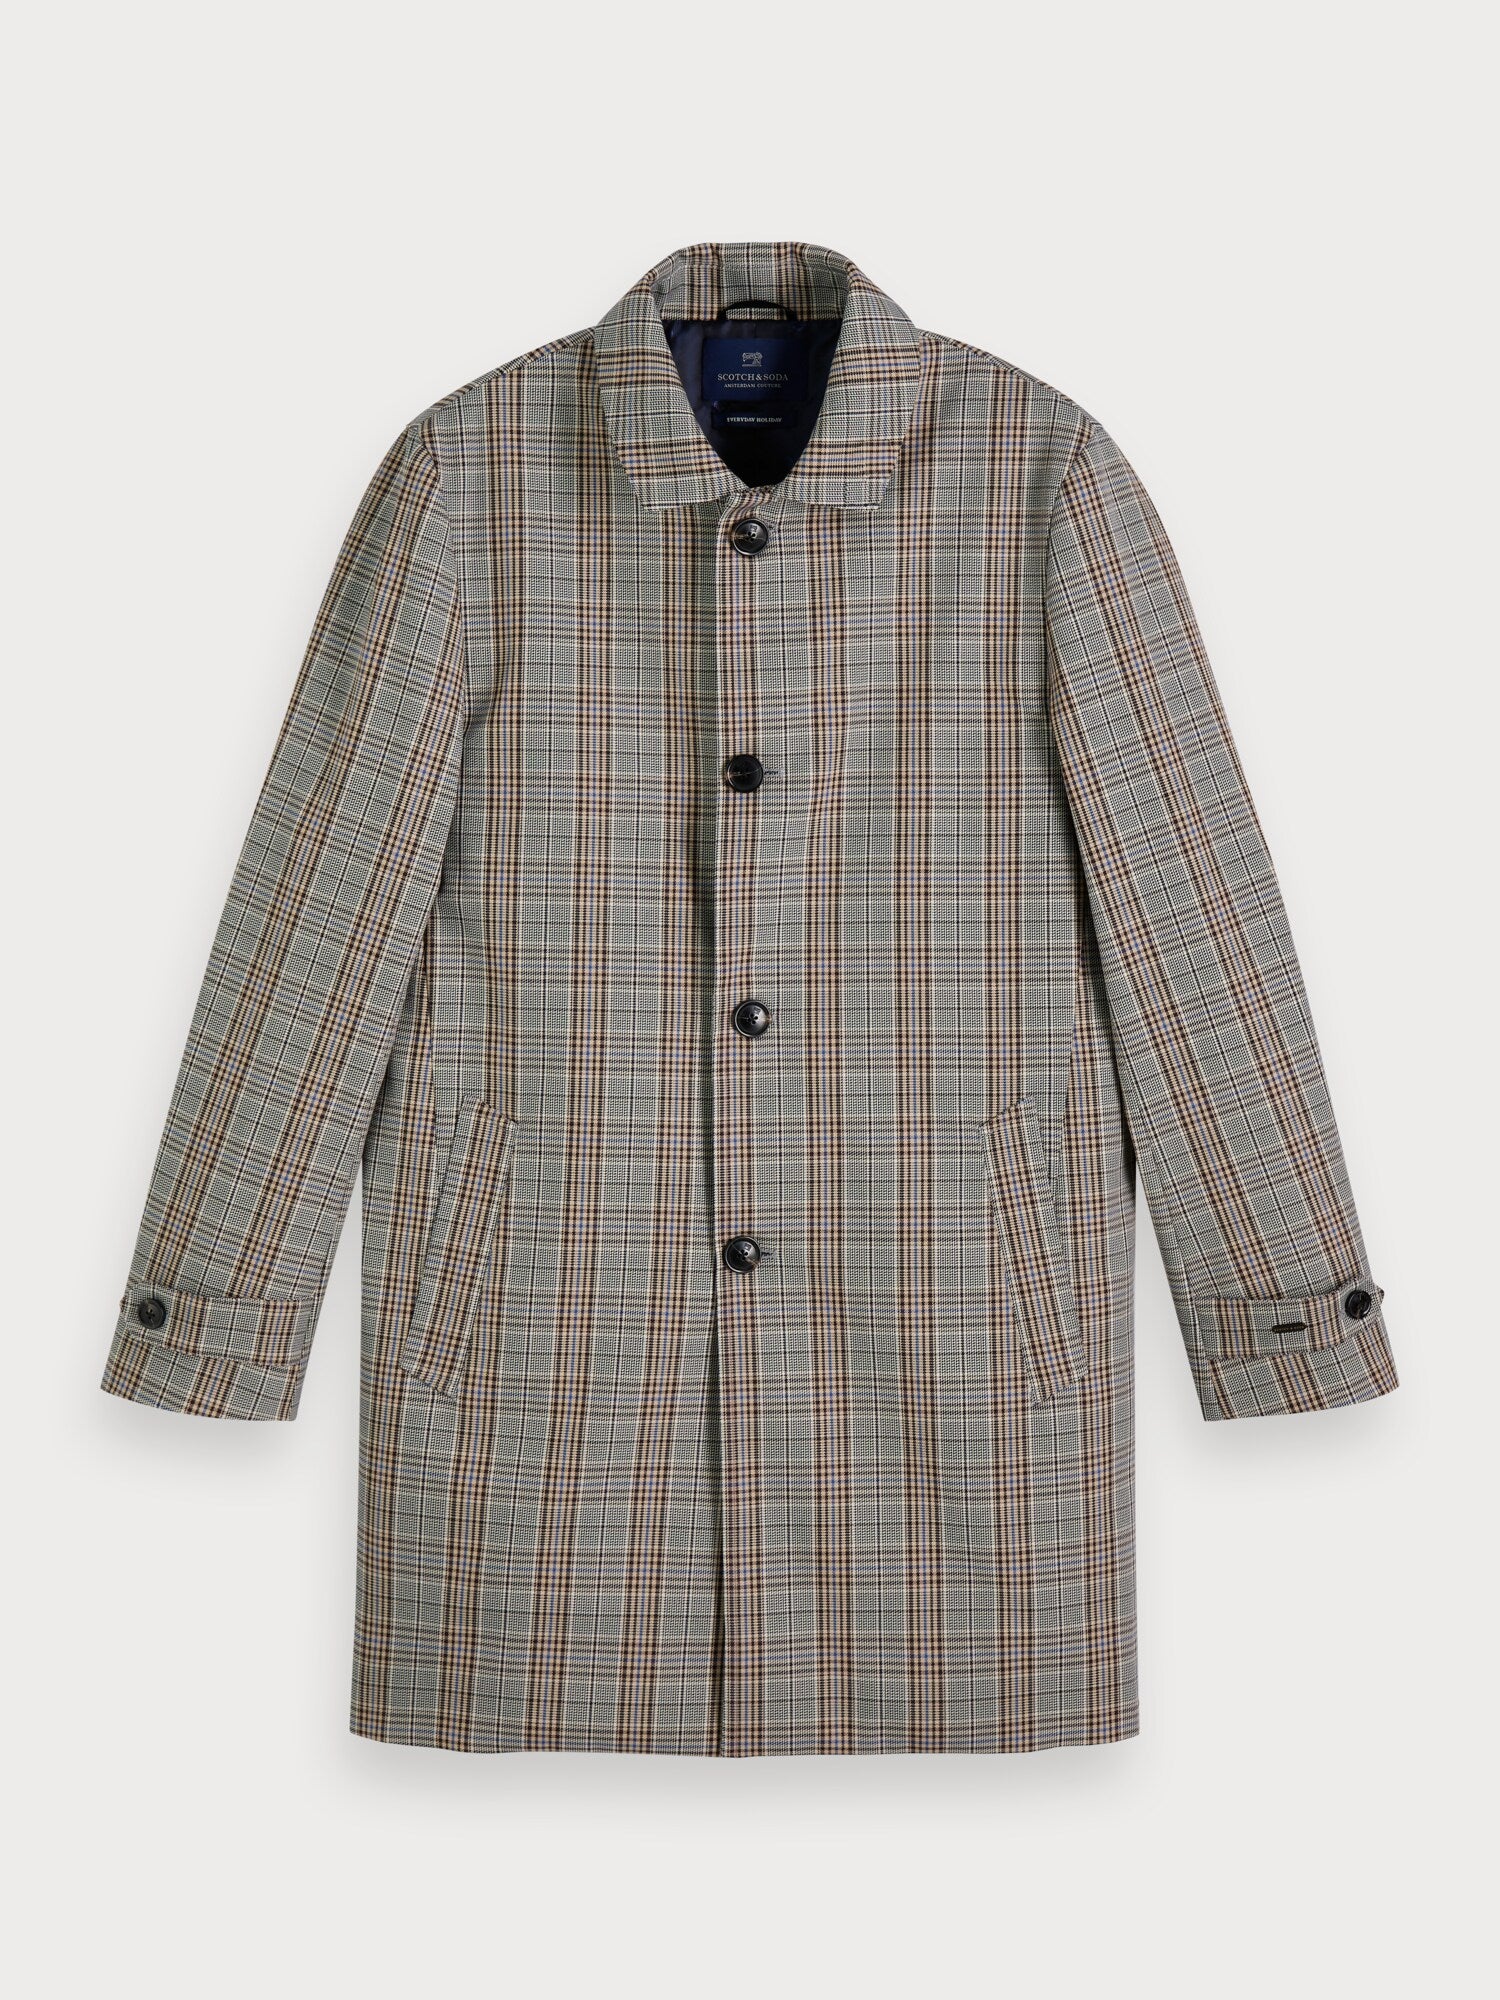 Scotch and Soda | Plaid Trench Coat in Brown | Scotch Select